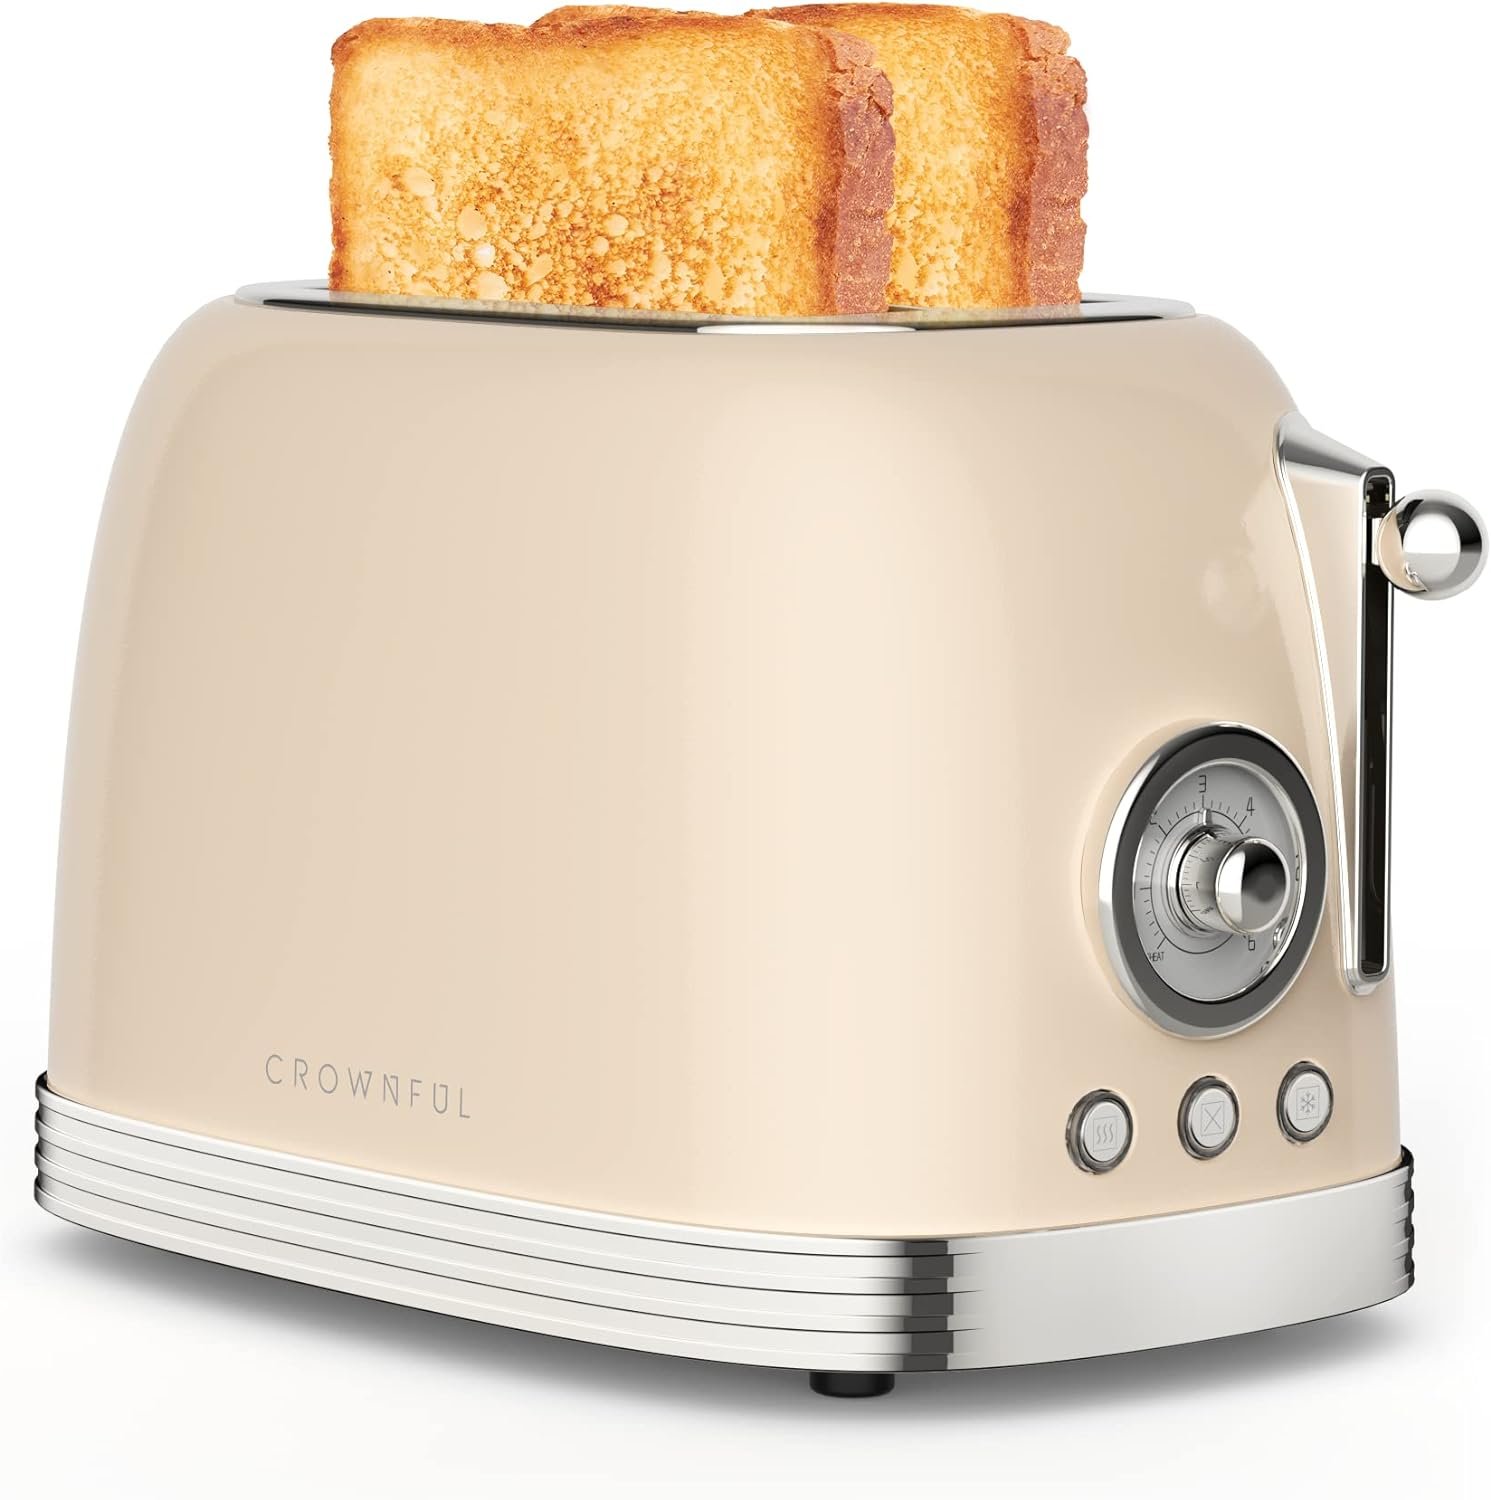 CROWNFUL 2-Slice Toaster, Extra Wide Slots Toaster, Retro Stainless Steel with Bagel, Cancel, Defrost, Reheat Function and 6-Shade Settings, Removal Crumb Tray, Cream